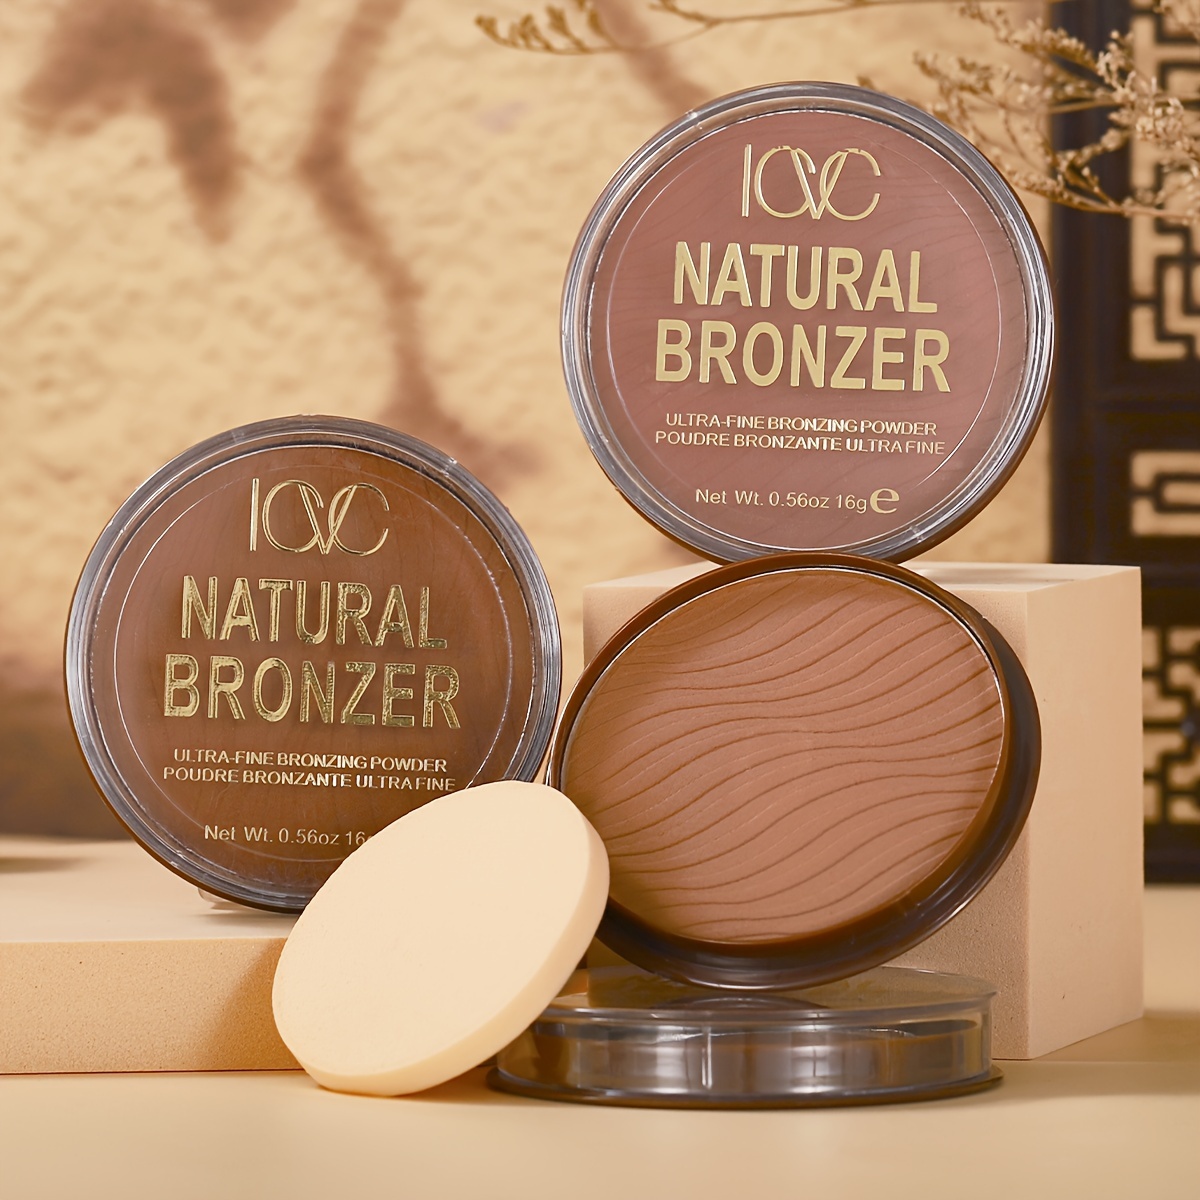 

Waterproof Matte Bronzer Powder - Oil Control, Sweat-resistant, Buildable Coverage For All Skin Tones, 16g Embrace Your Natural Beauty - Subtle Or Bold, It's Up To You